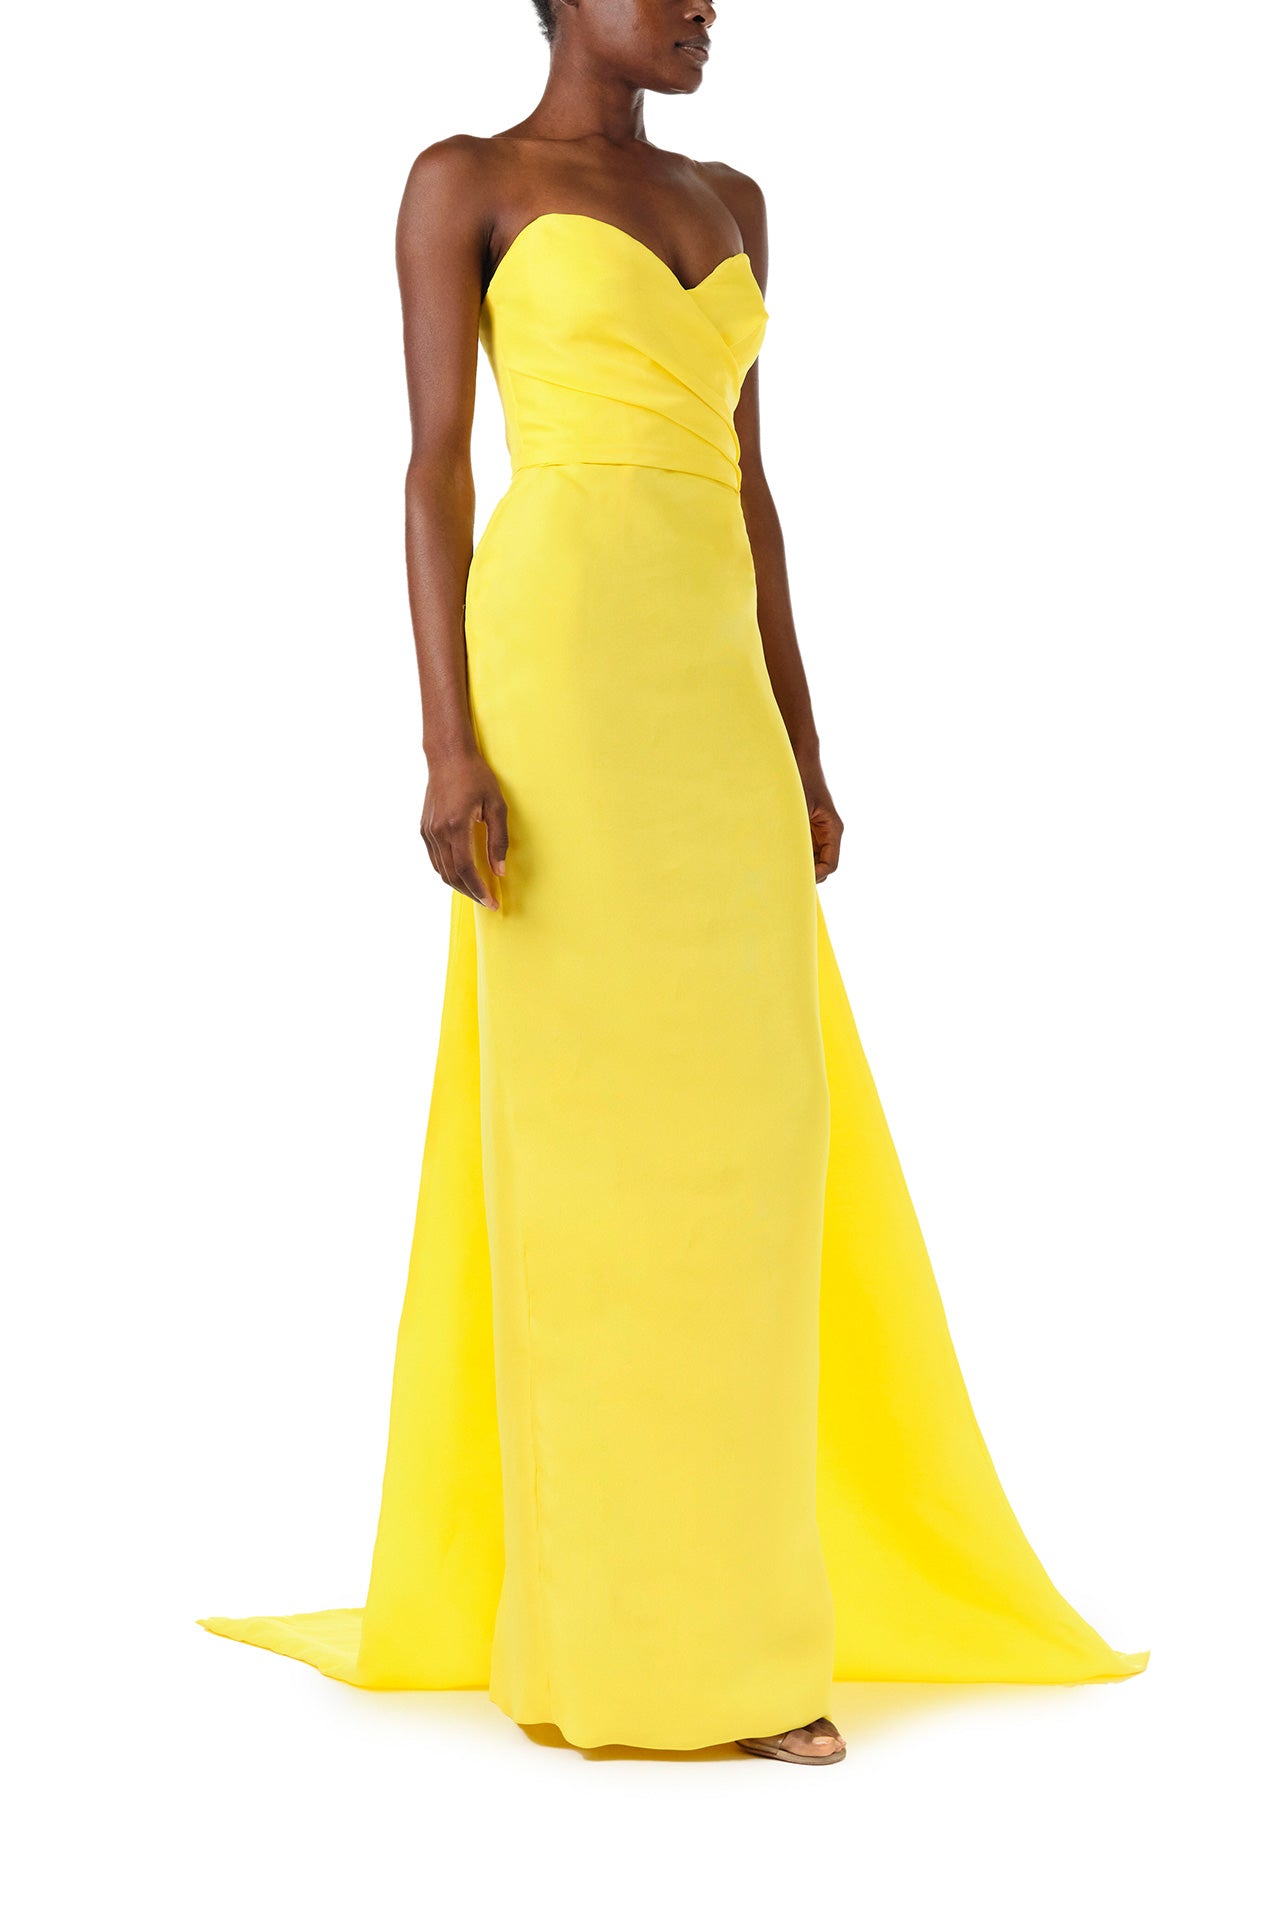 Monique Lhuillier Spring 2024 yellow strapless gown with sweetheart neckline and train - right side.